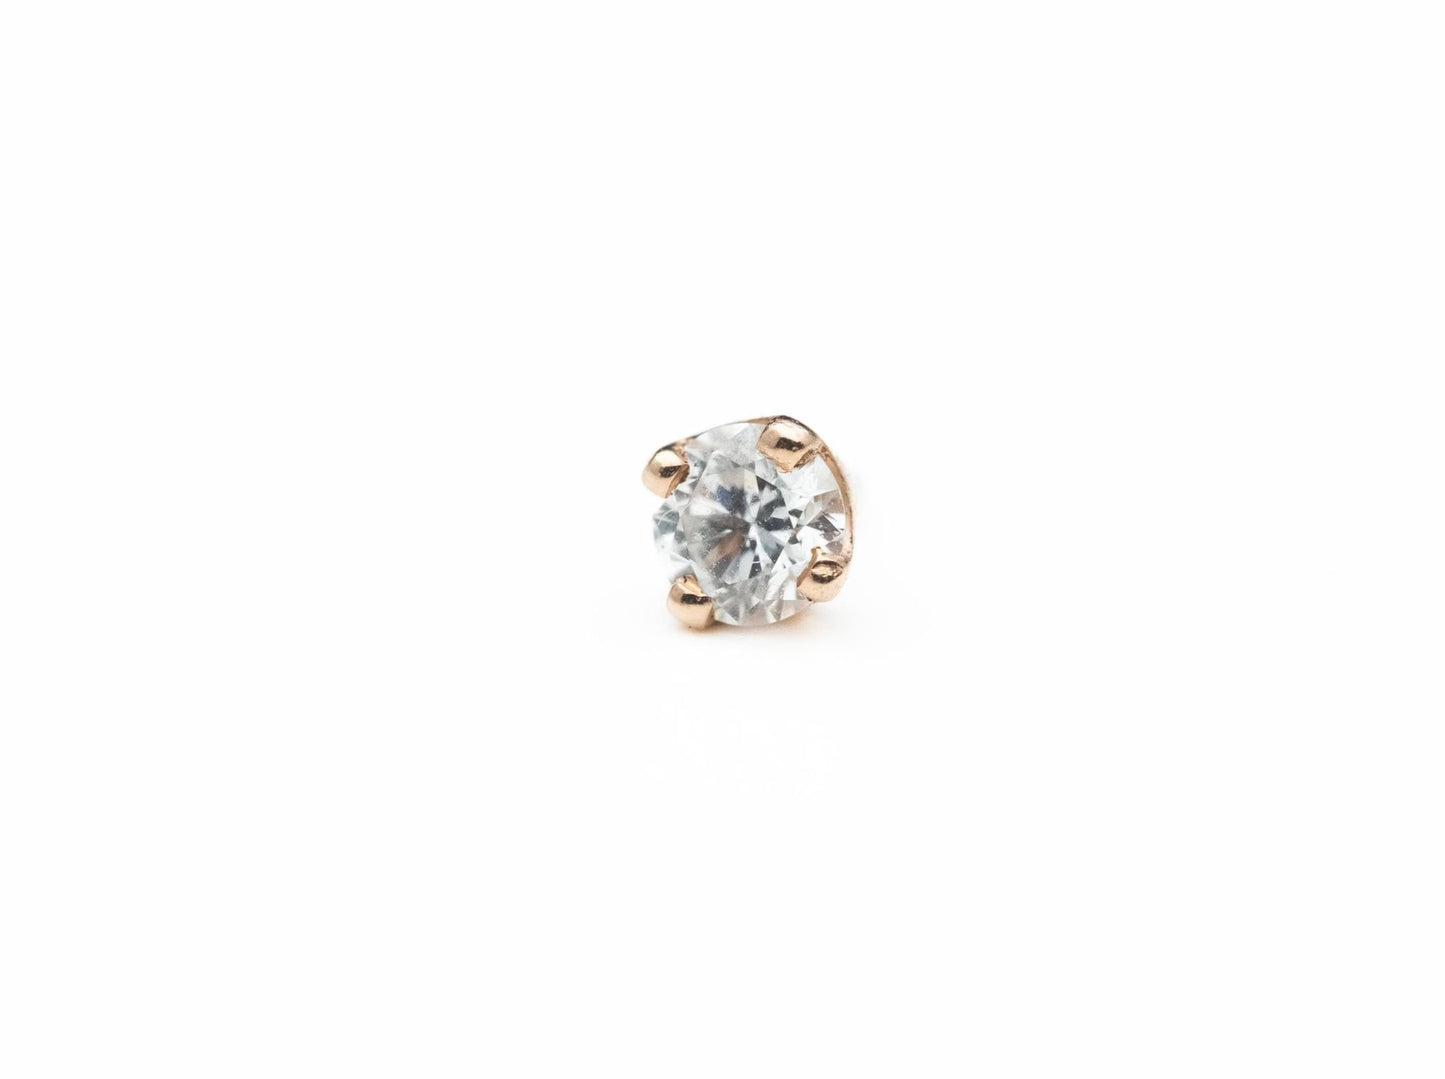 Round Prong 1.5mm VS Diamond in 14k Rose Gold Threadless by BVLA